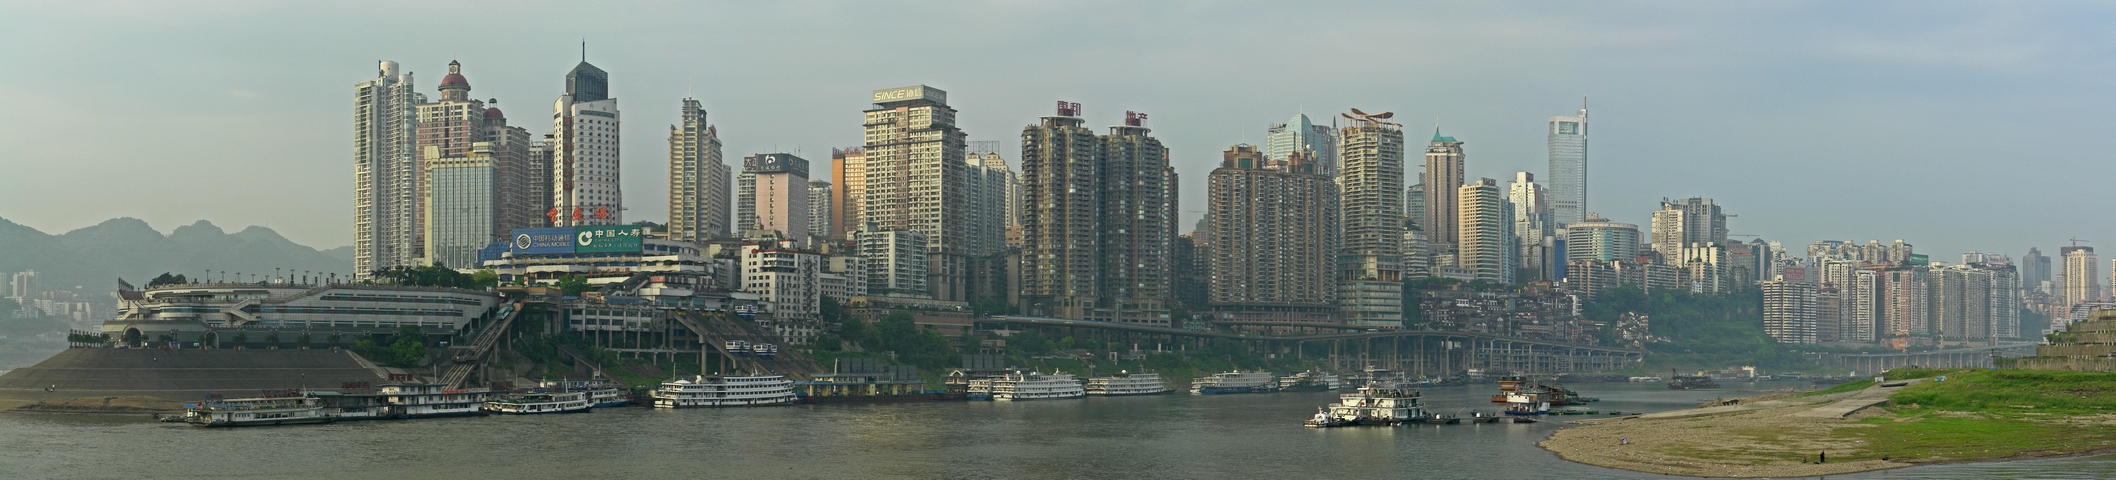 Chongqing08.jpg - 4 images, Size: 10600 x 2405, FOV: 79.76 x 18.10, RMS: 3.09, Lens: Standard, Projection: Spherical, Color: LDR